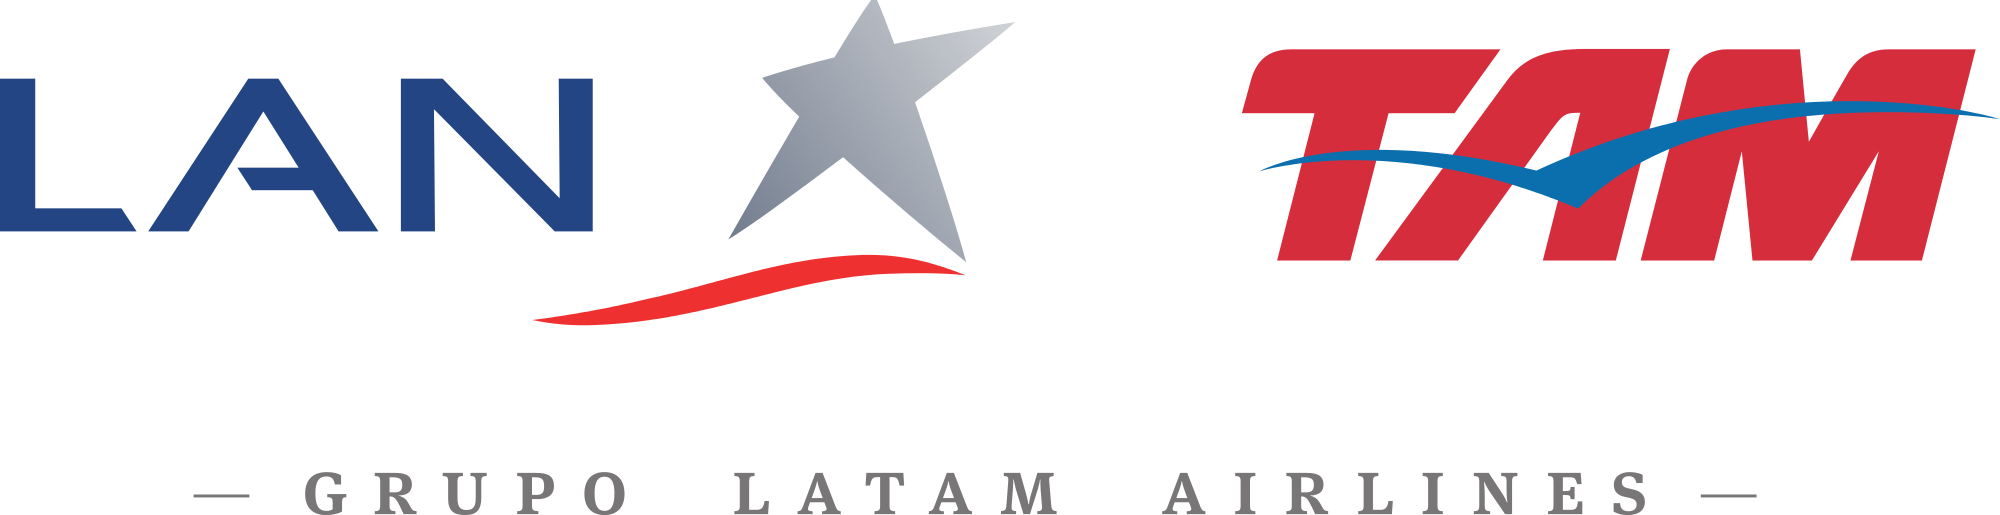 Open Hdpng.com  - Latam Airlines, Transparent background PNG HD thumbnail